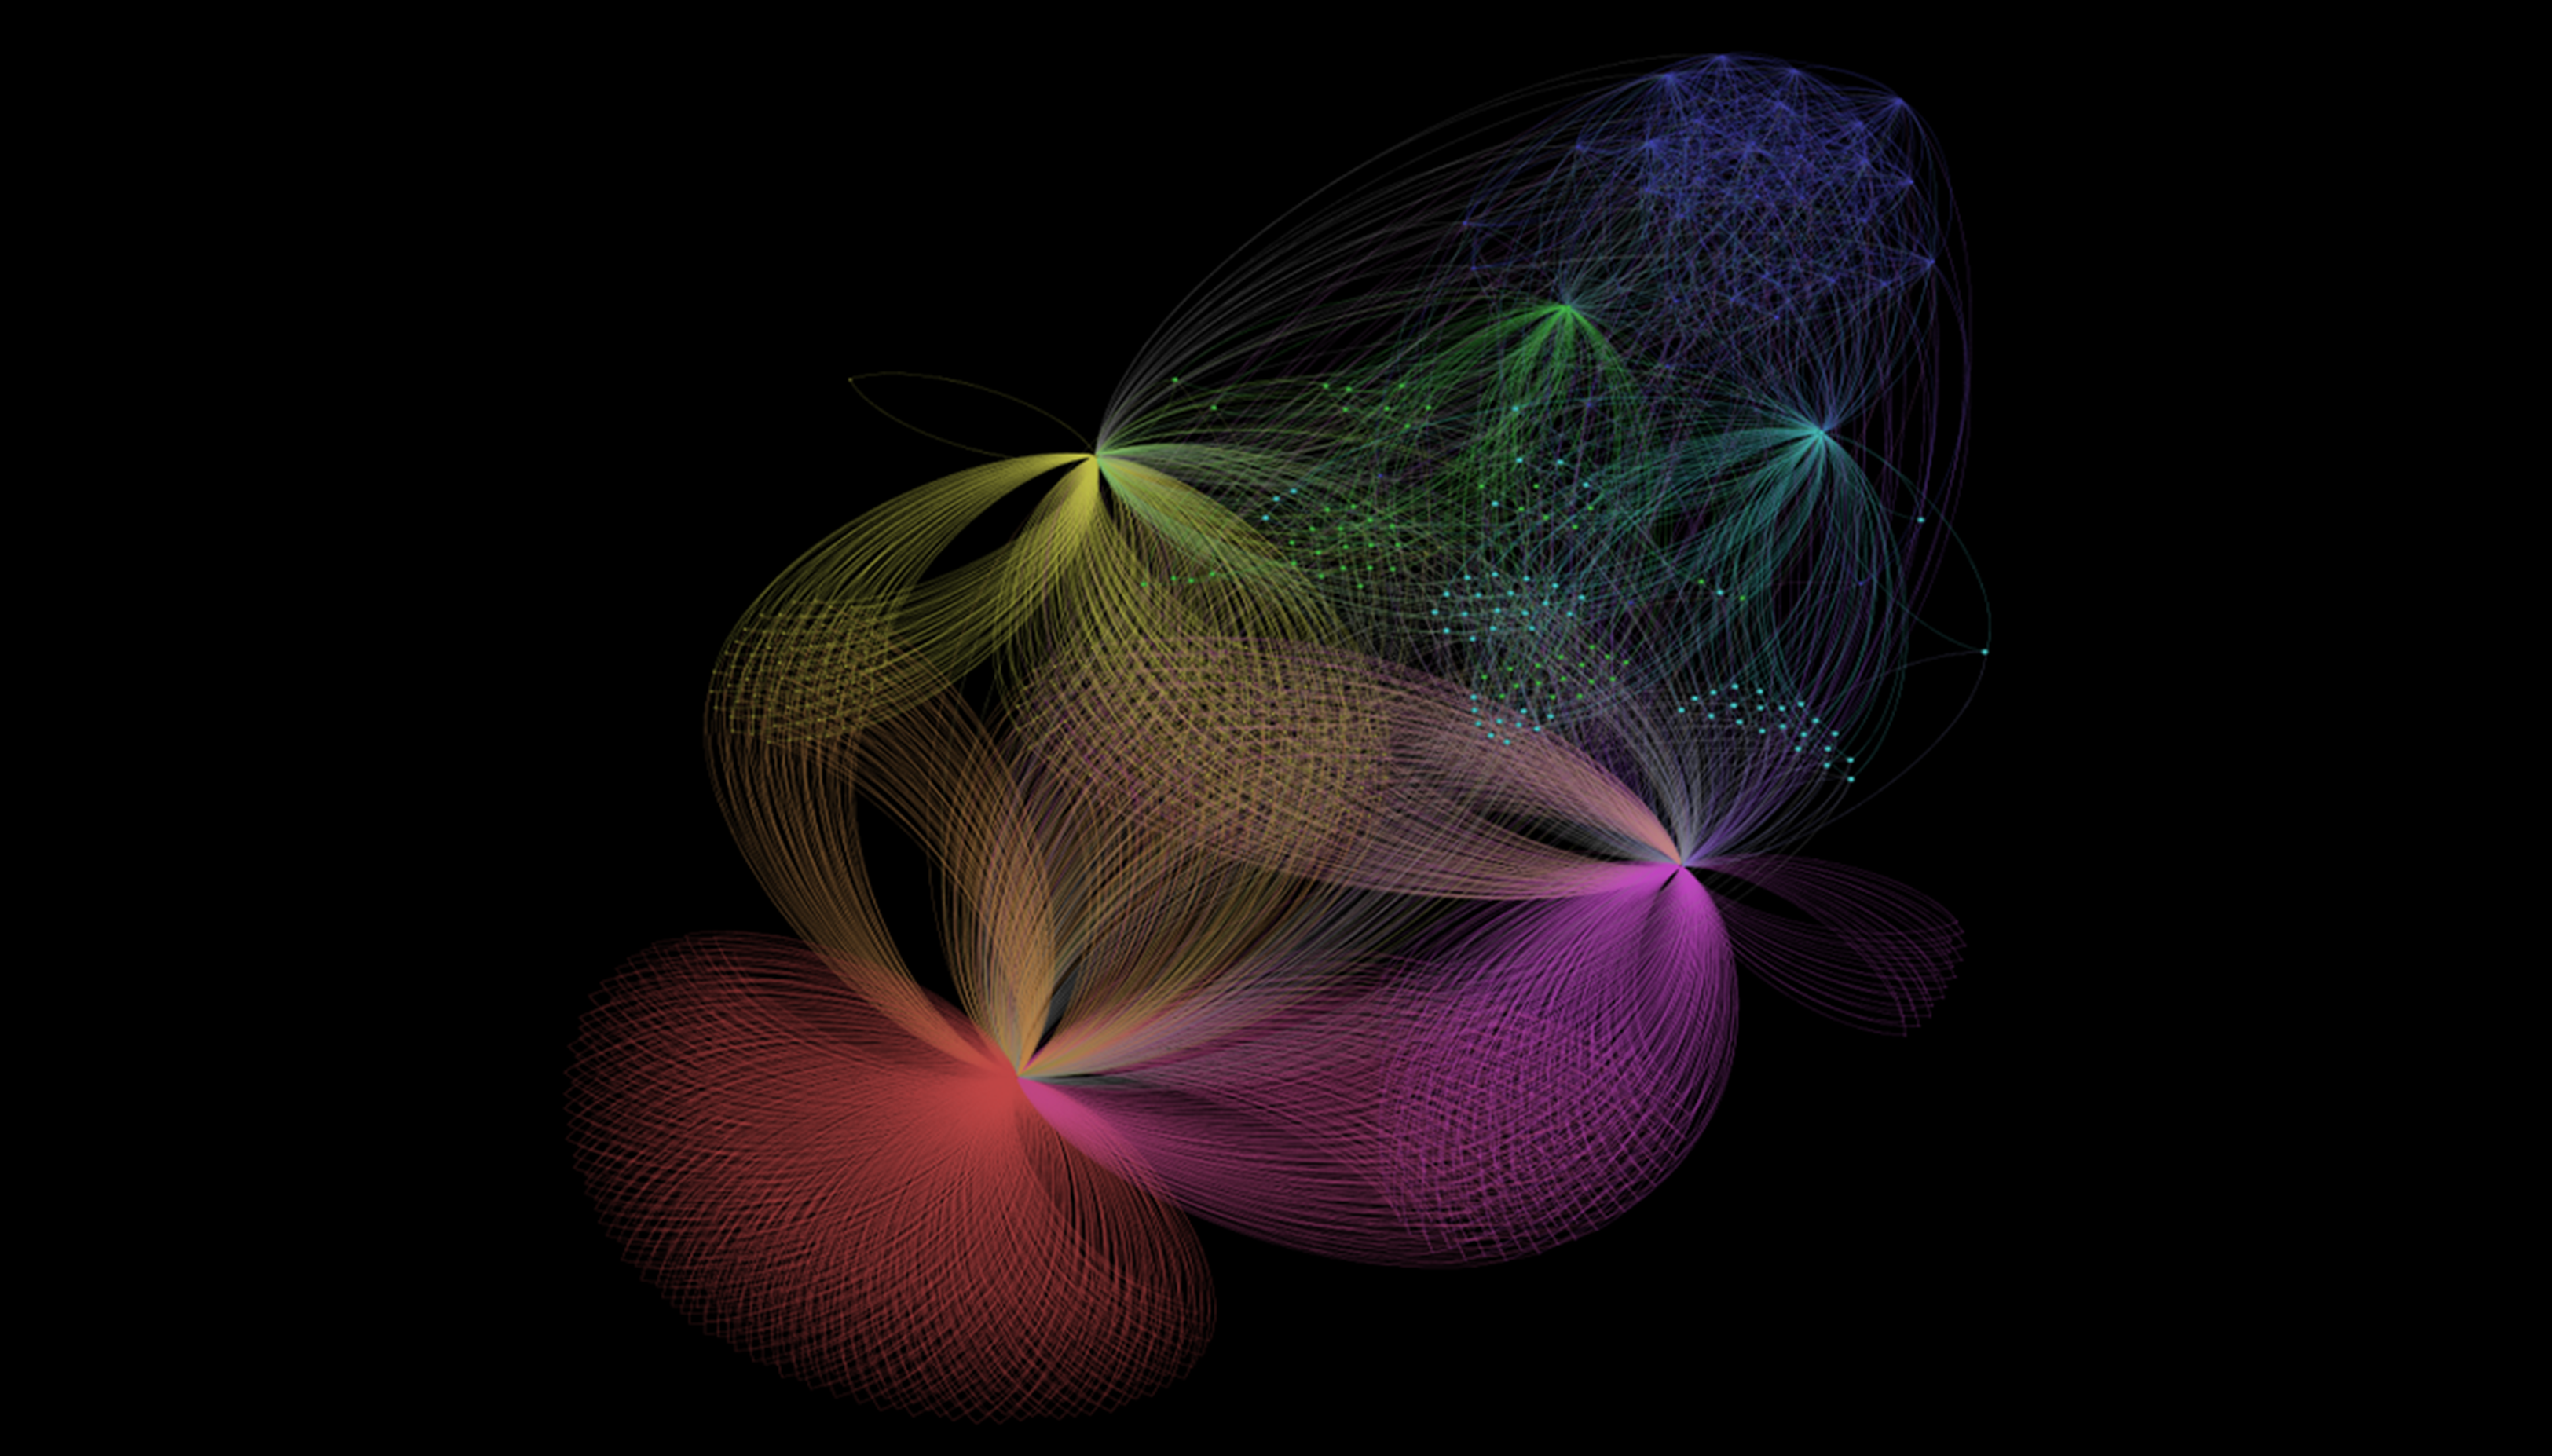 Network of groups of users of Gowalla